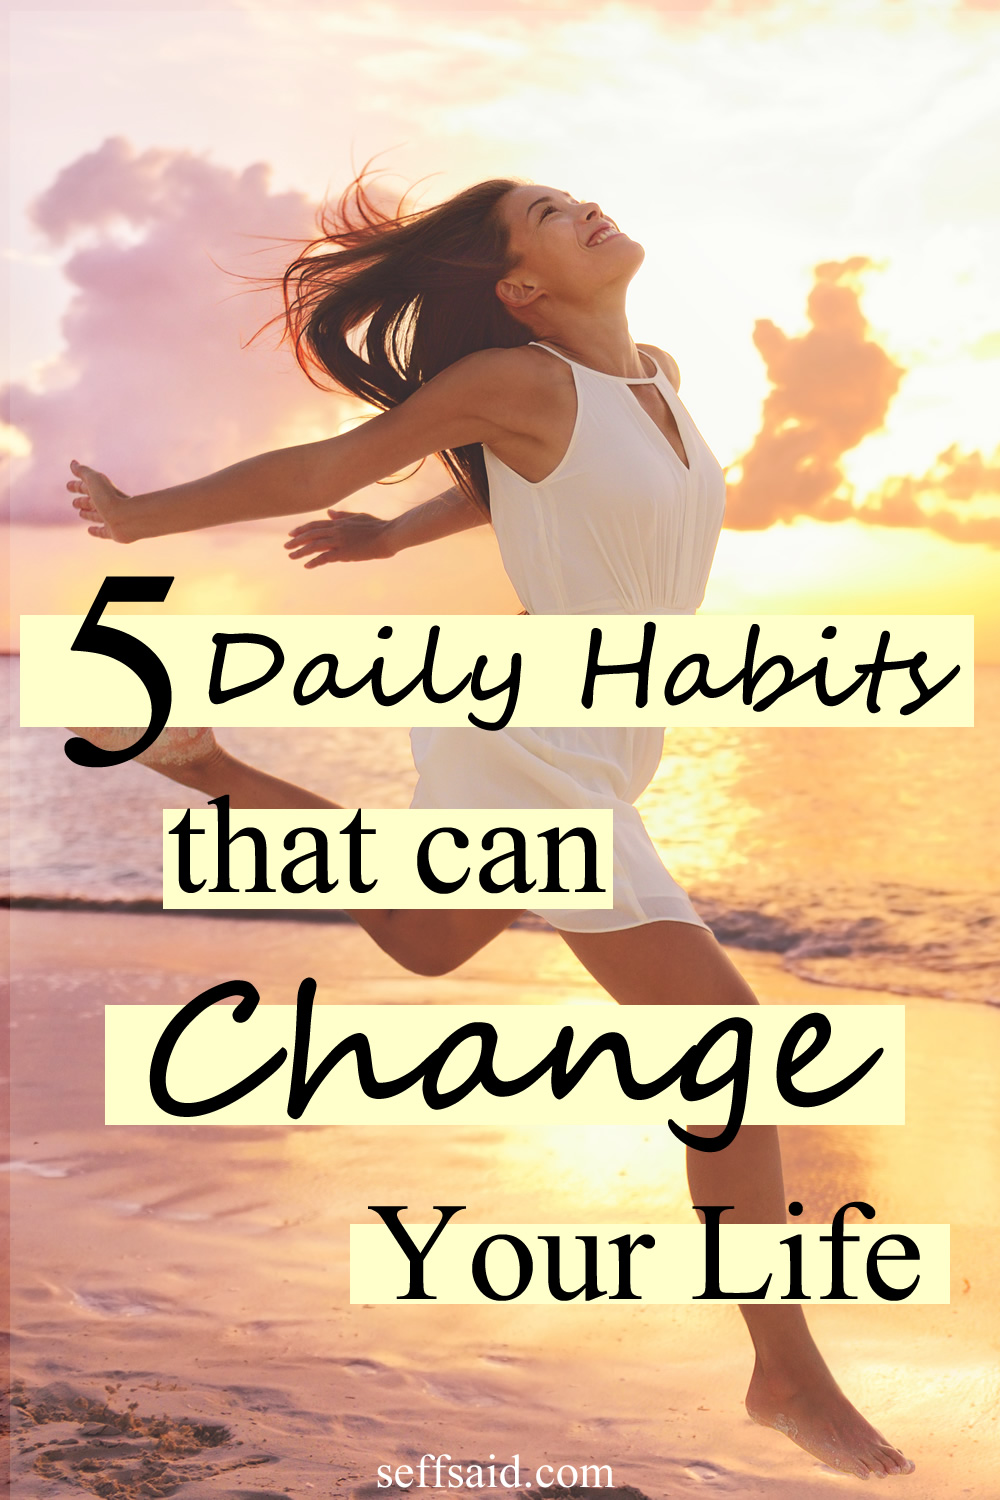 5 Simple Daily Habits That Can Change Your Life For The Better